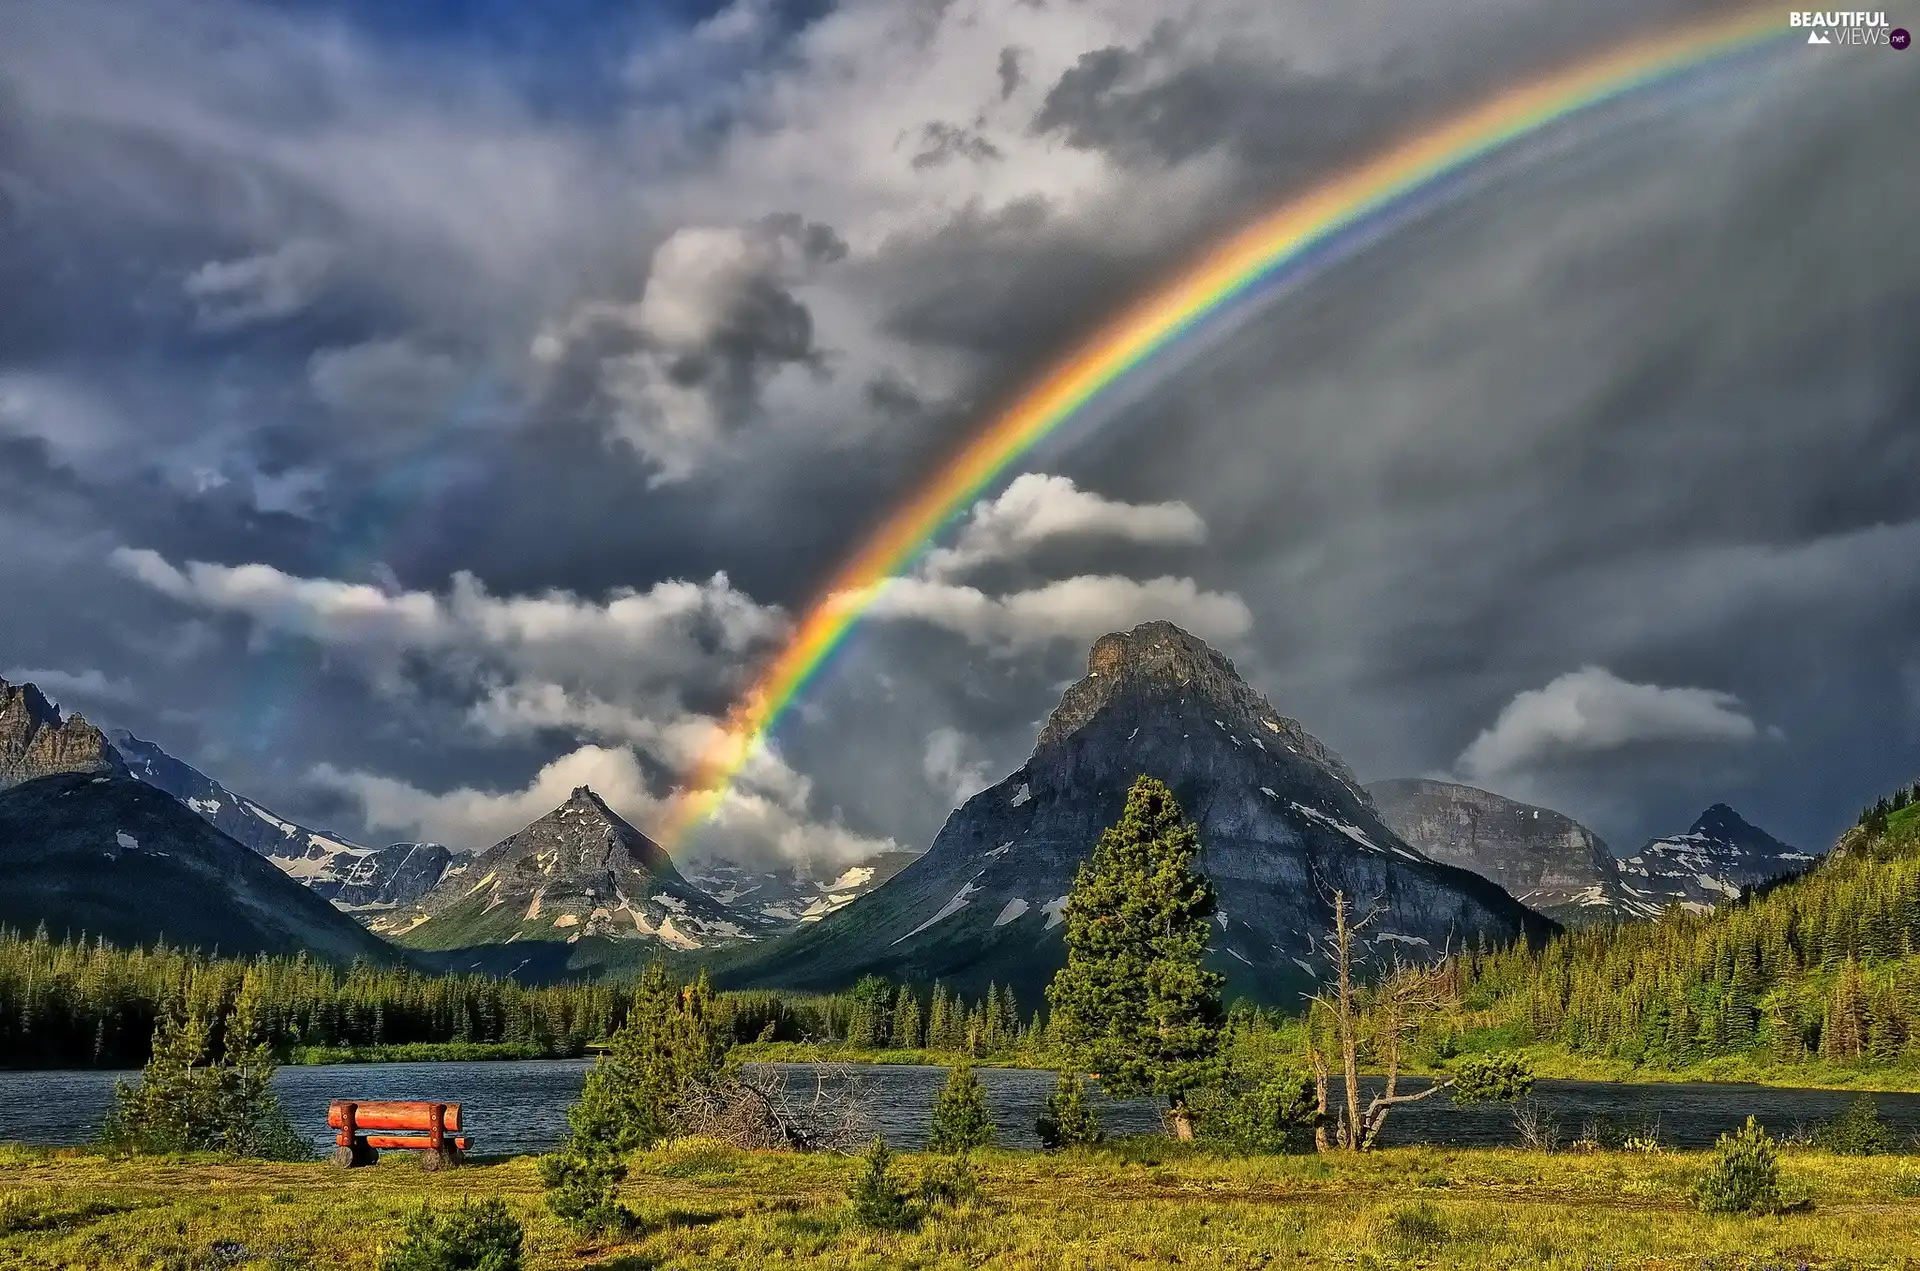 River, Mountains, Great Rainbows